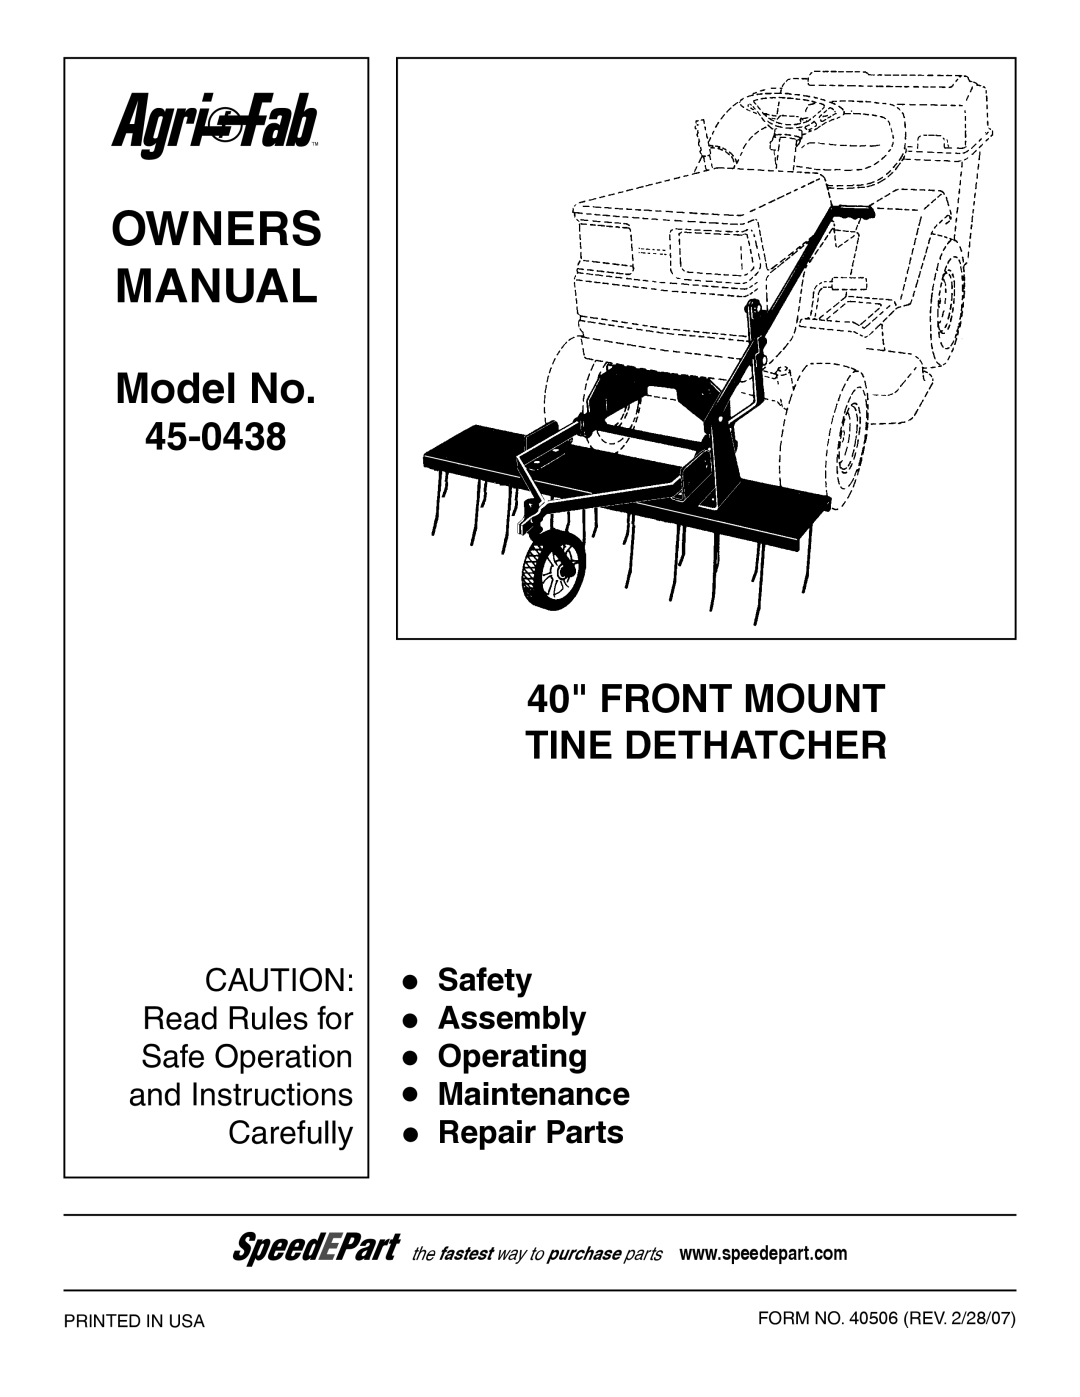 Agri-Fab 45-0438 owners manual, Model No, Front Mount Tine Dethatcher, Safety Assembly Operating Maintenance, Repair Parts 